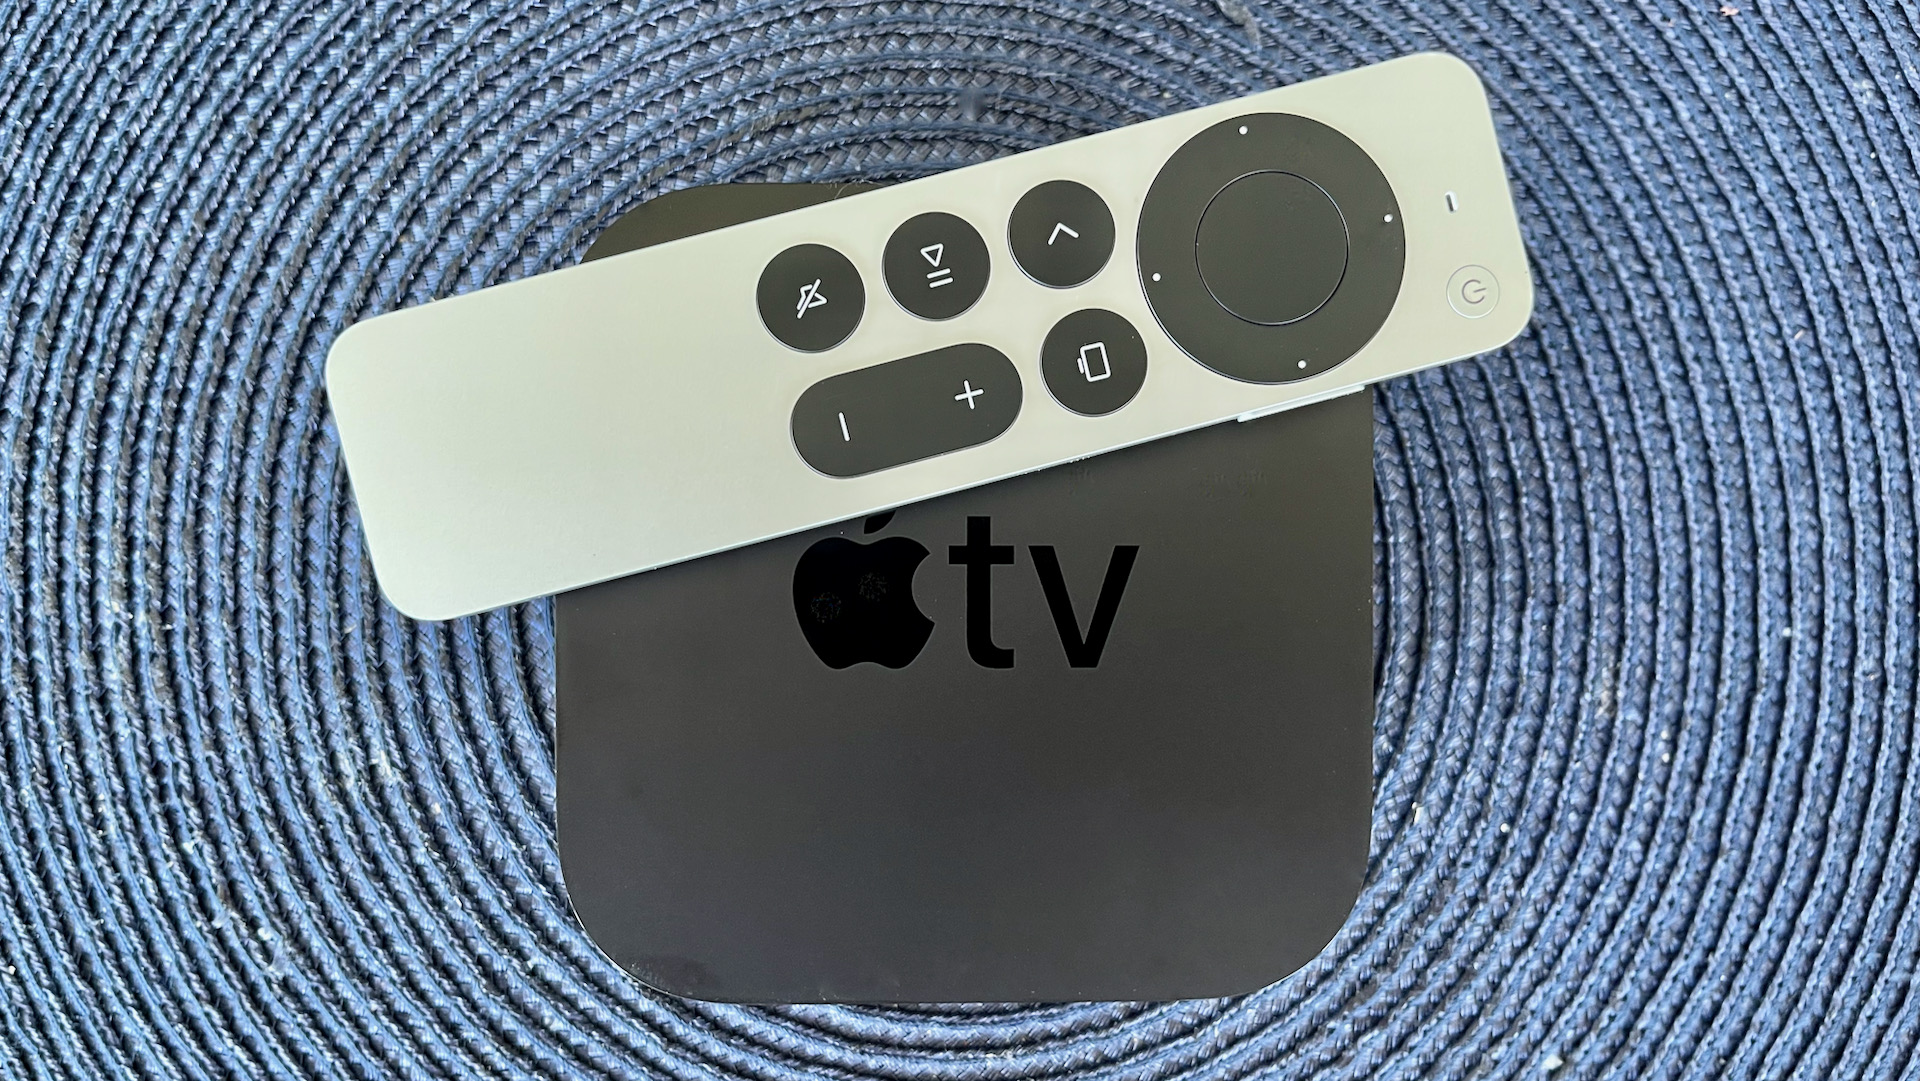 Apple TV 4K with a remote on it.